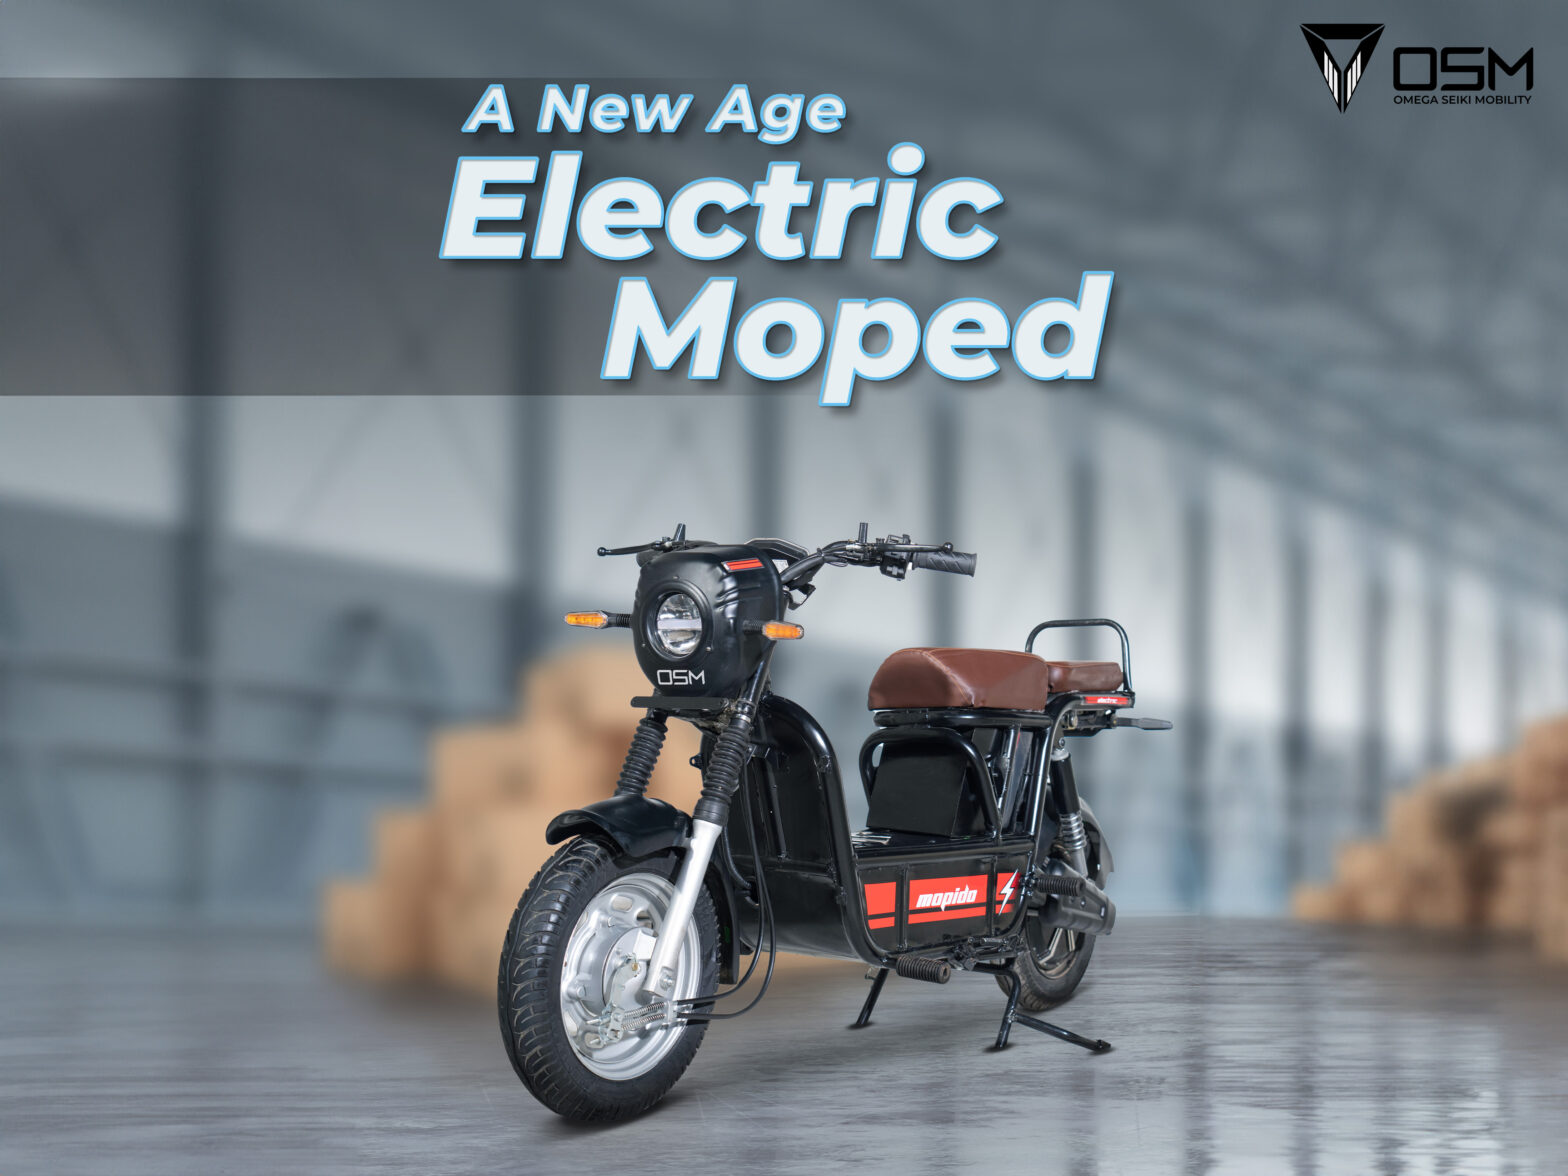 New age electric- moped